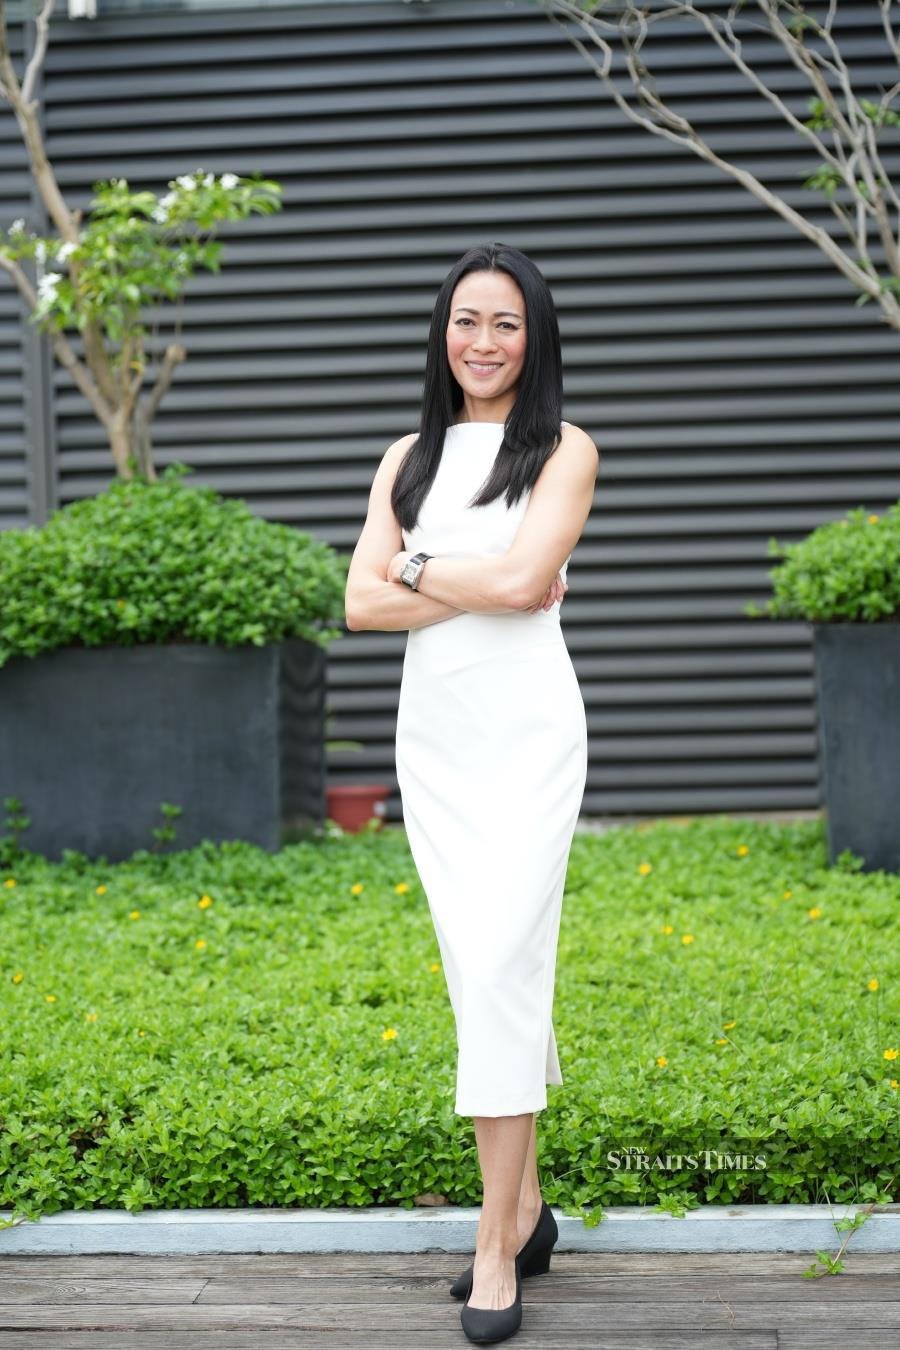  Lim Pei Yan, co-founder and executive director of Visionary Solutions Sdn Bhd, the sole distributor of BALMUDA Malaysia.